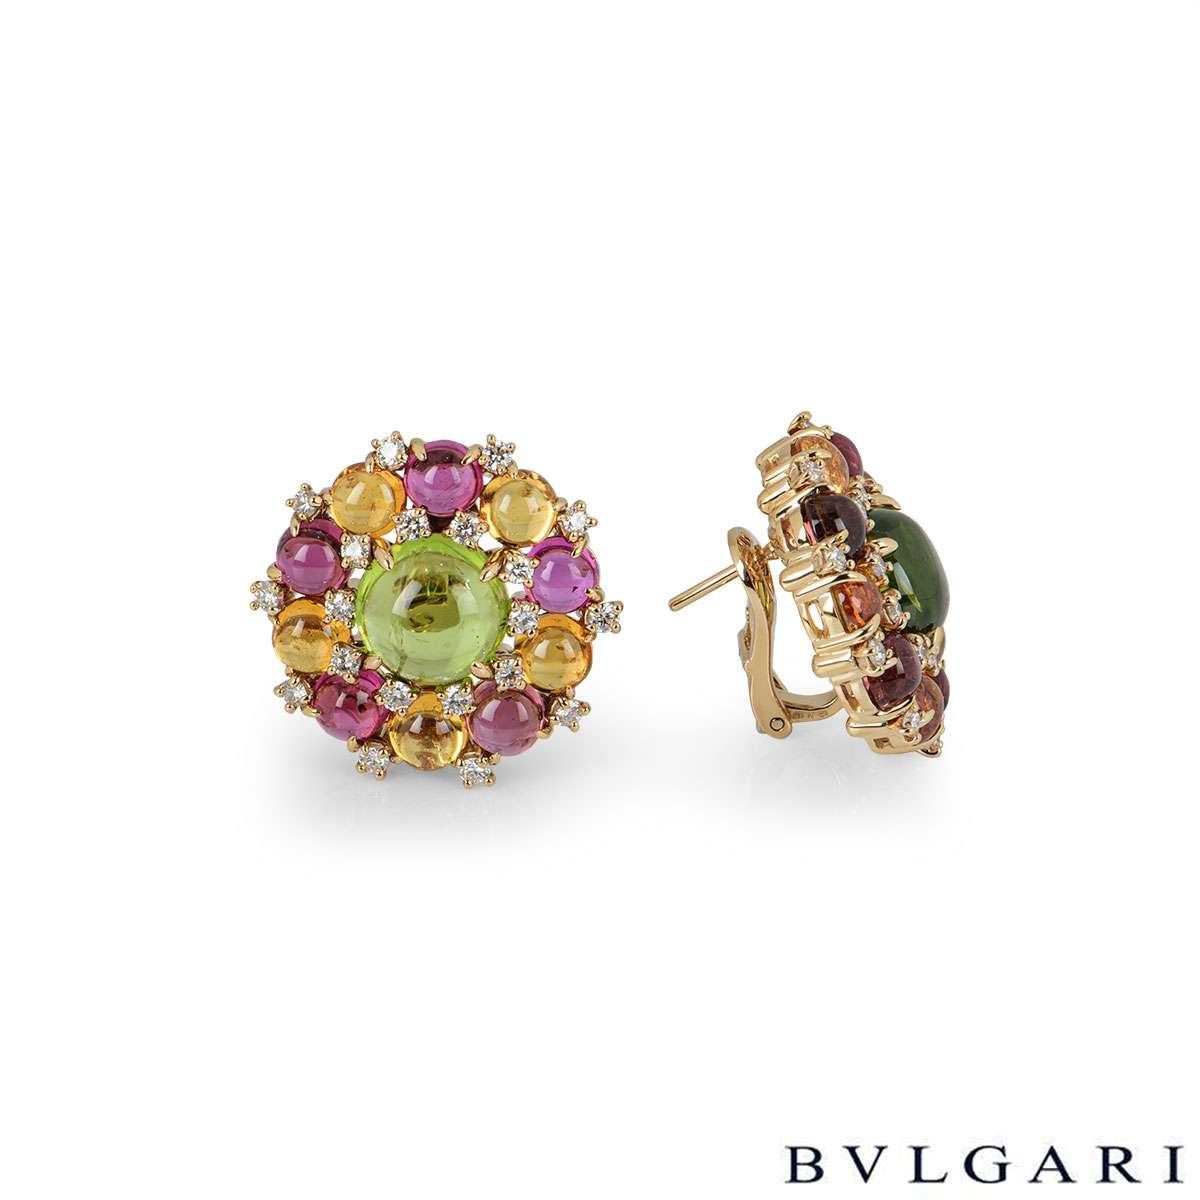 A pair of 18k rose gold diamond and multi-gemstone earrings. The earrings each have a boarder of 10 alternating cabochon cut citrine and tourmaline gemstones, with a large peridot in the centre. There are 20 round brilliant cut diamonds set